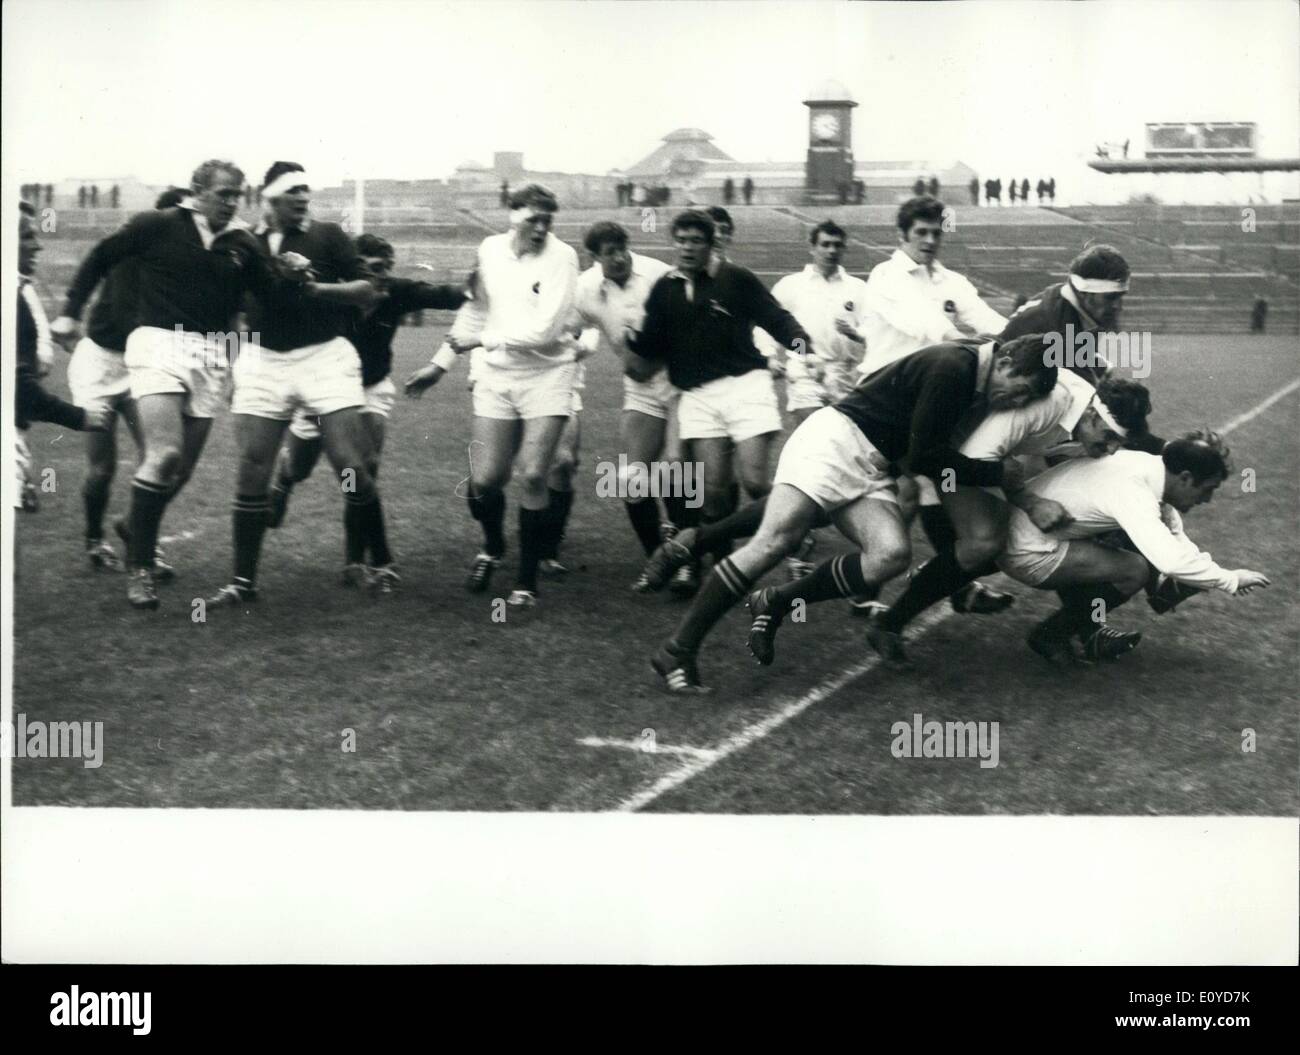 Dec. 12, 1969 - Scotland Beat The Springboks. Photo shows Incident during the Scotland (light jerseys) and South Africa rugby match at Murrayfield, Scotland on Saturday which Scotland won 6-3. Stock Photo